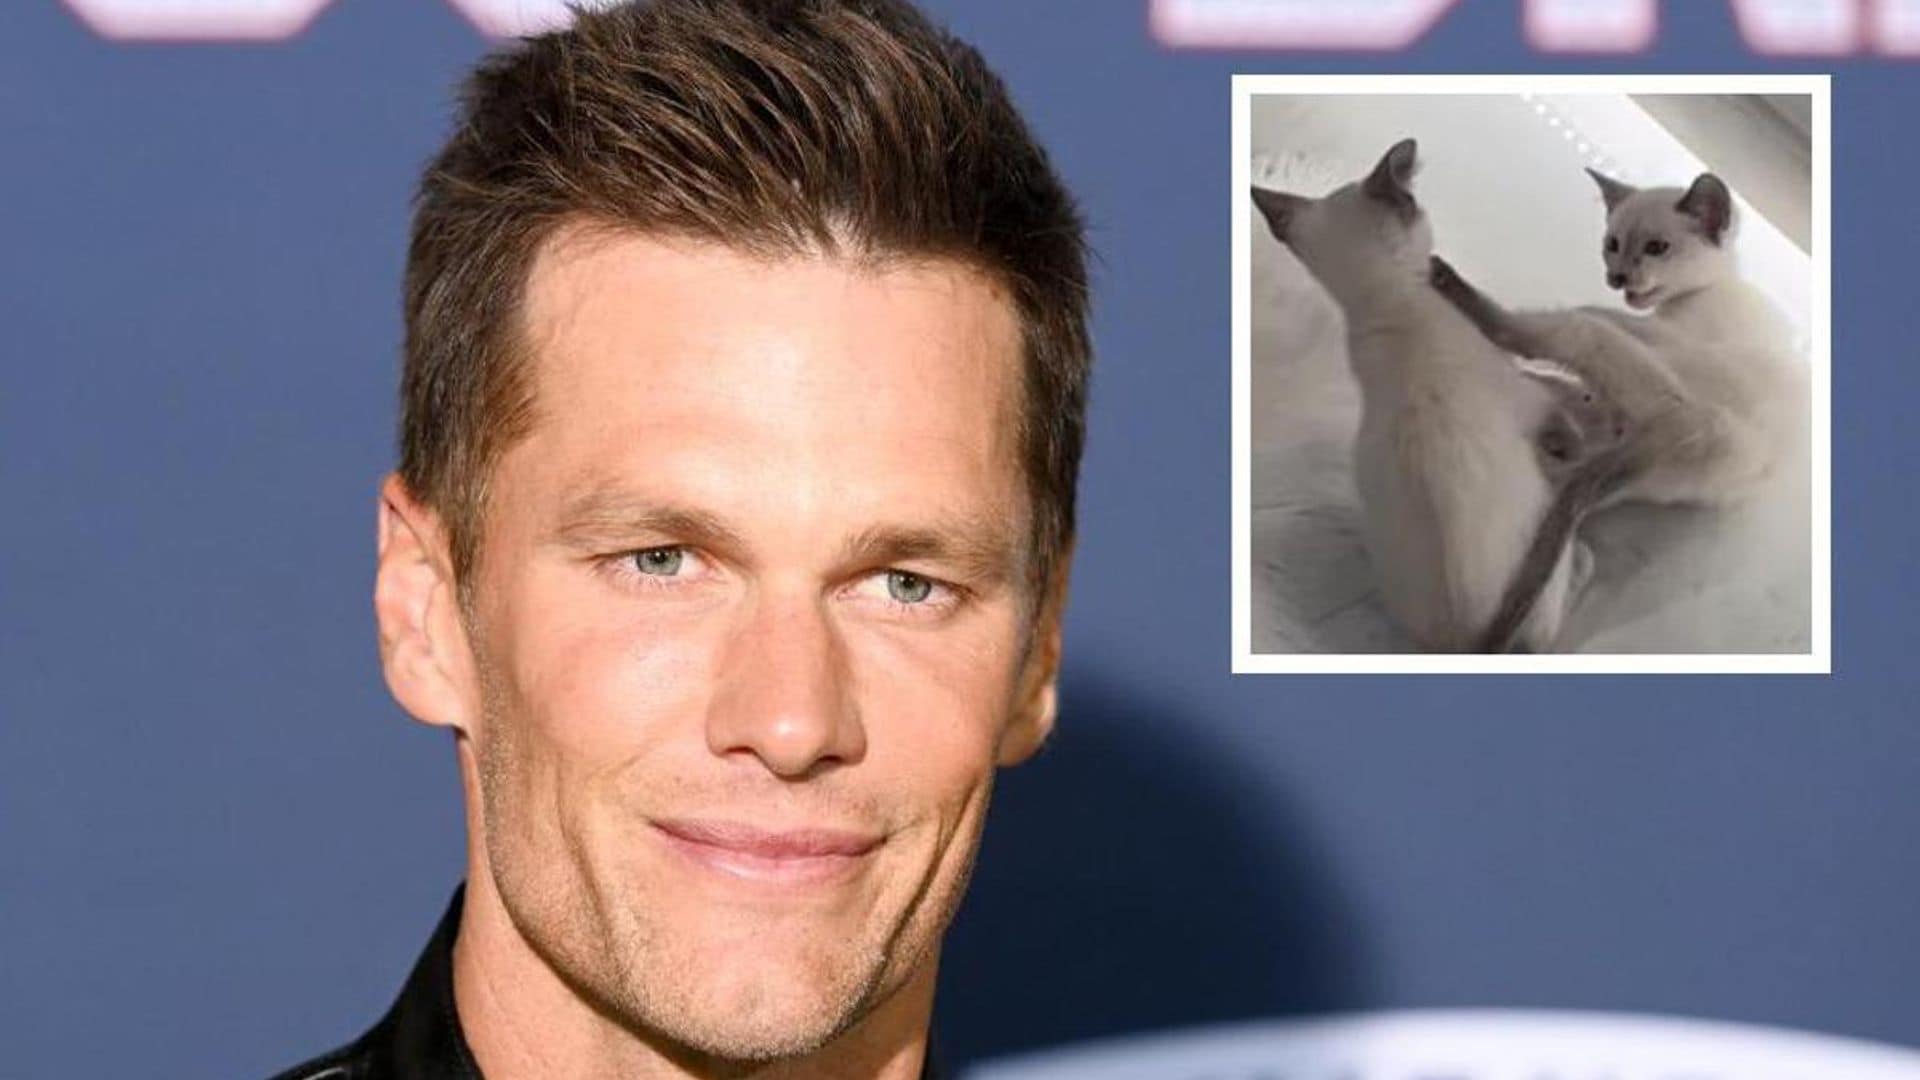 Tom Brady shares what his mornings look like following split from Gisele Bündchen